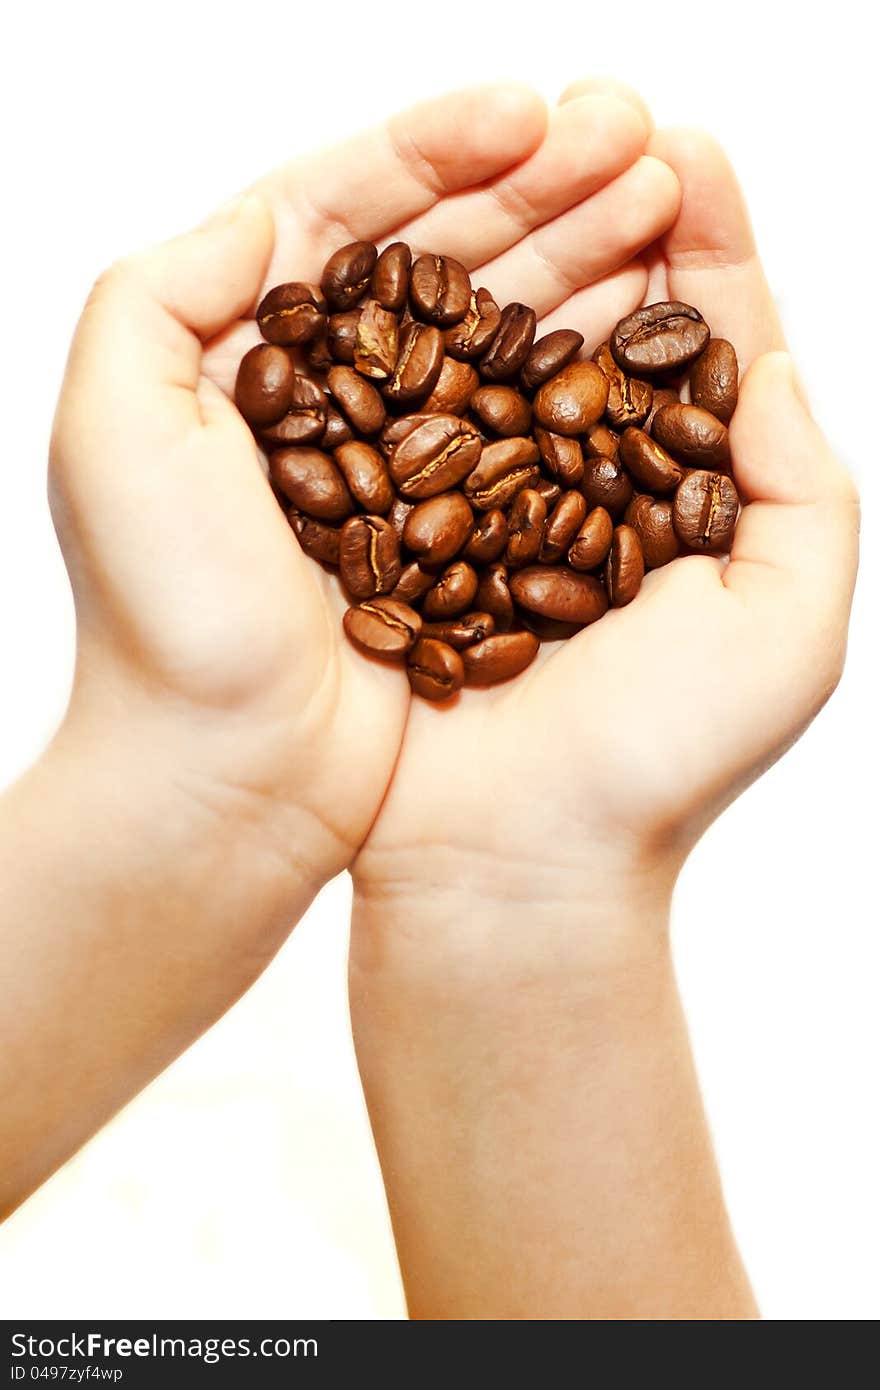 If you look closely at this picture shows two hearts. one heart out of the hands, the second of coffee beans. Children&#x27;s hands holding coffee. If you look closely at this picture shows two hearts. one heart out of the hands, the second of coffee beans. Children&#x27;s hands holding coffee